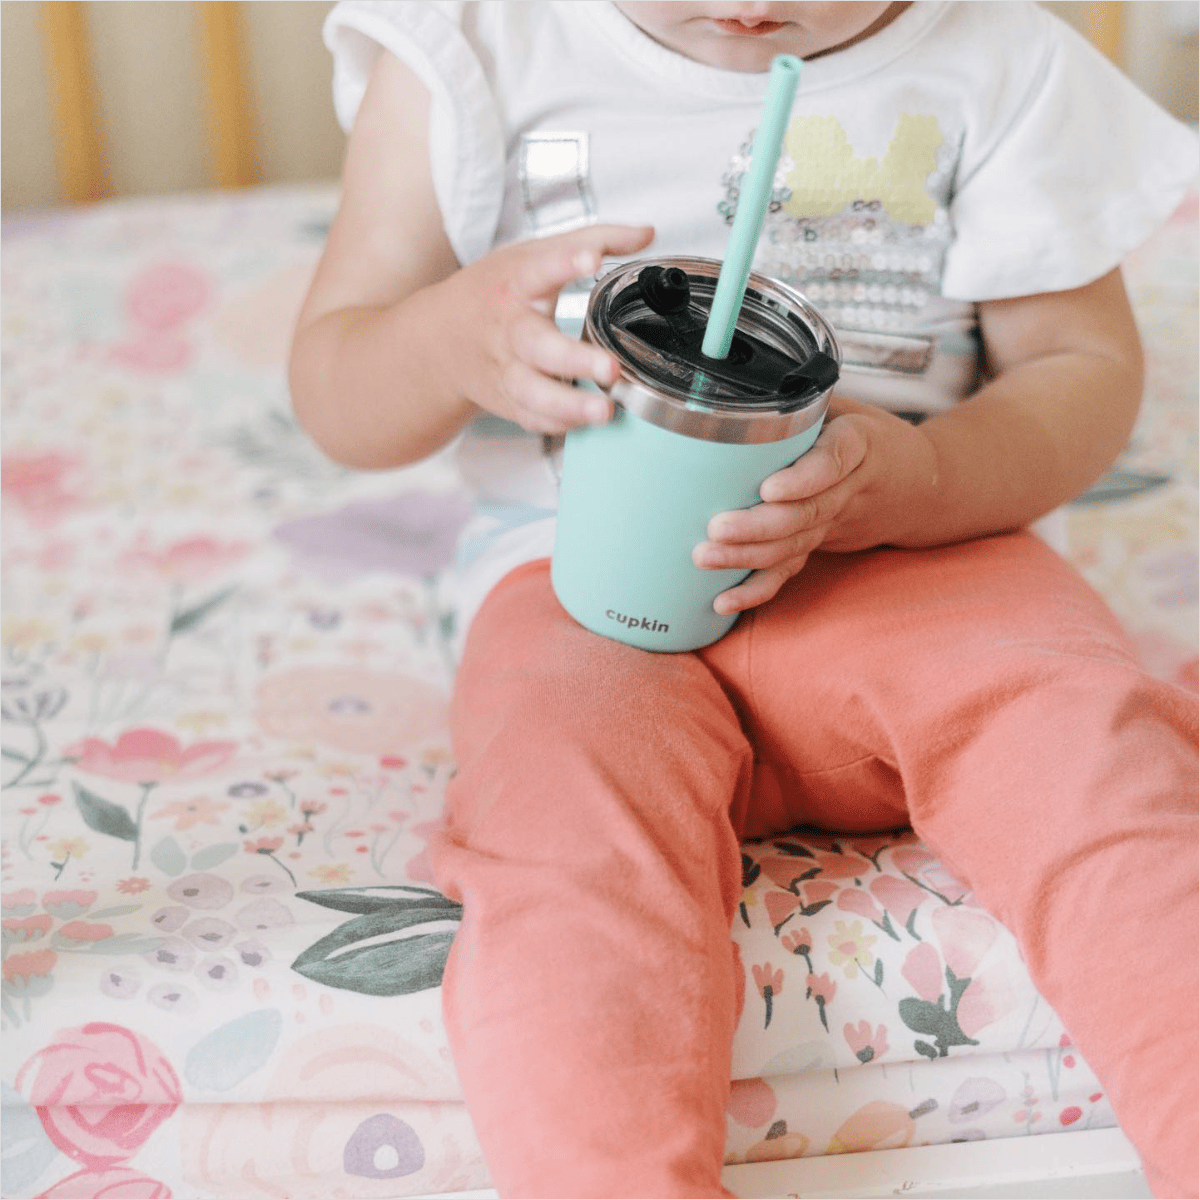 Little one sitting on bed drinking from a Cupkin cup